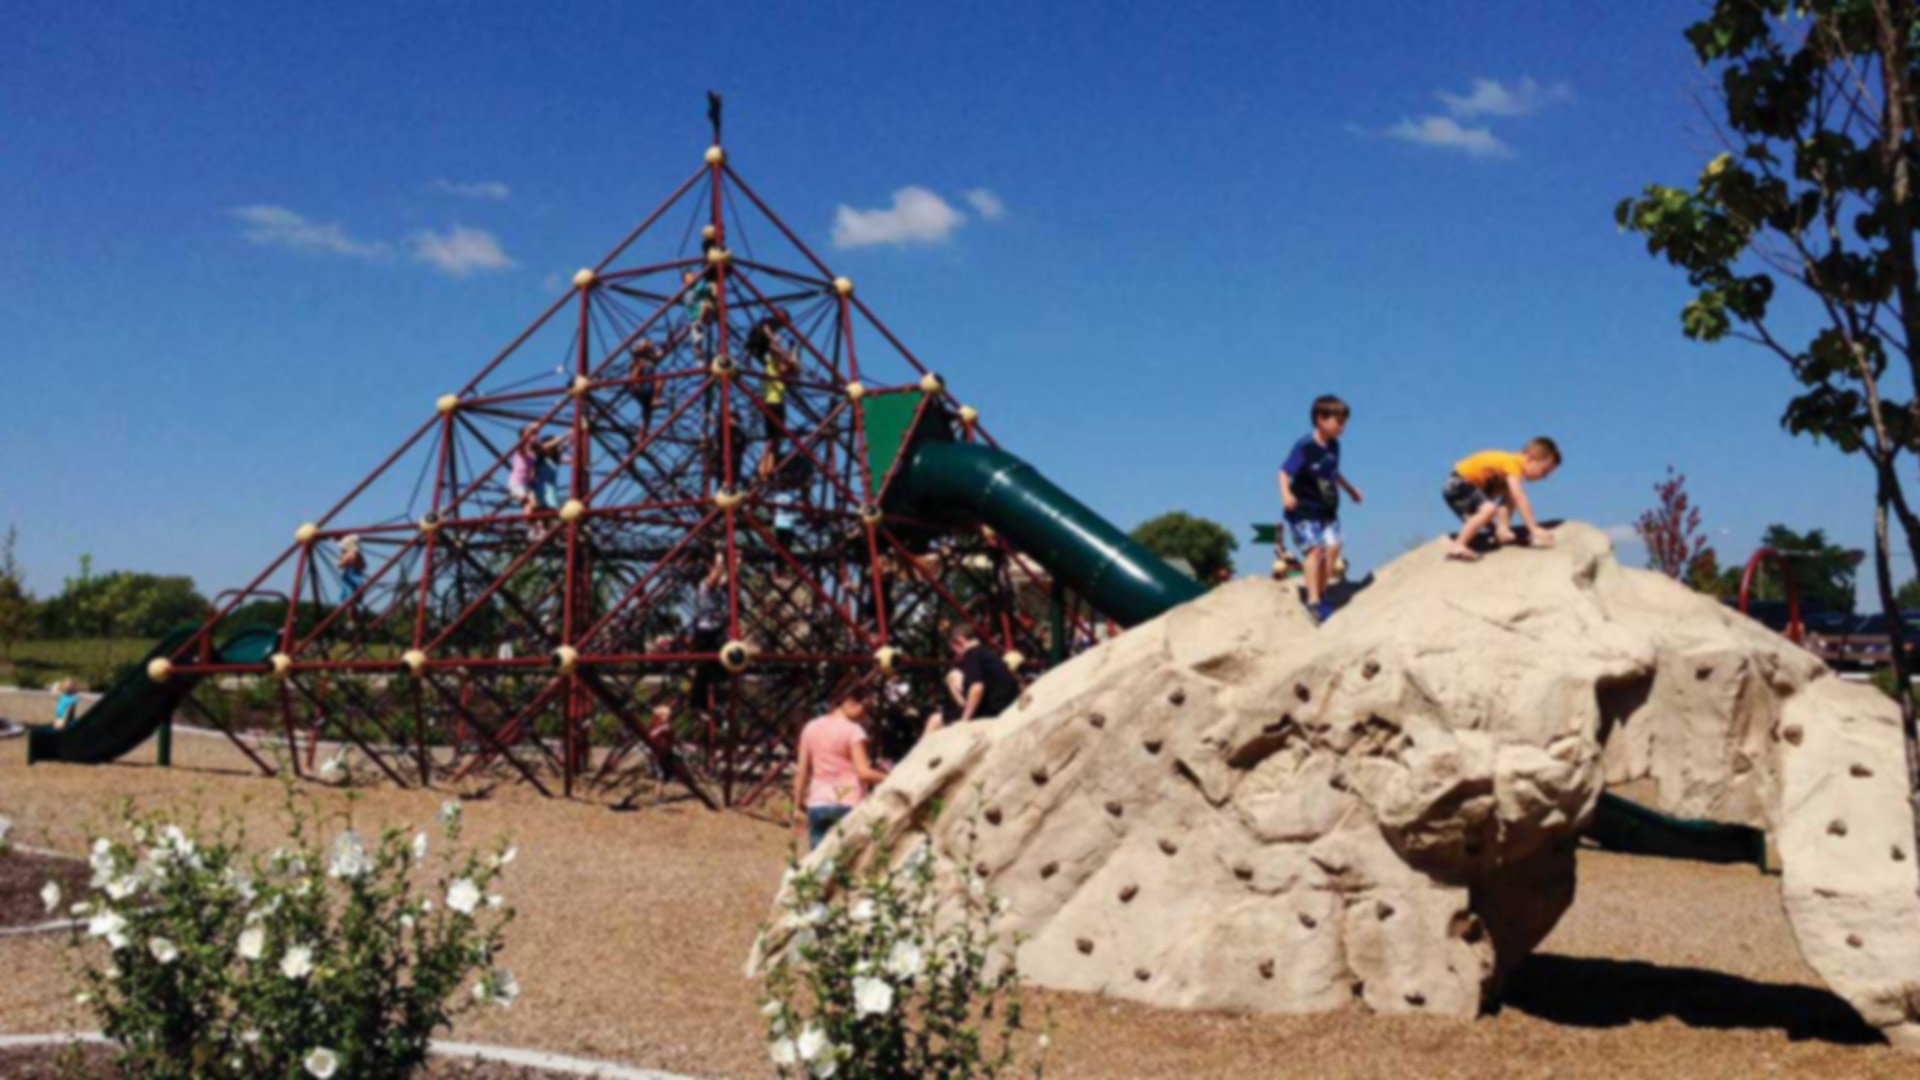 kids climbing on a rock sculpture and rope playground 